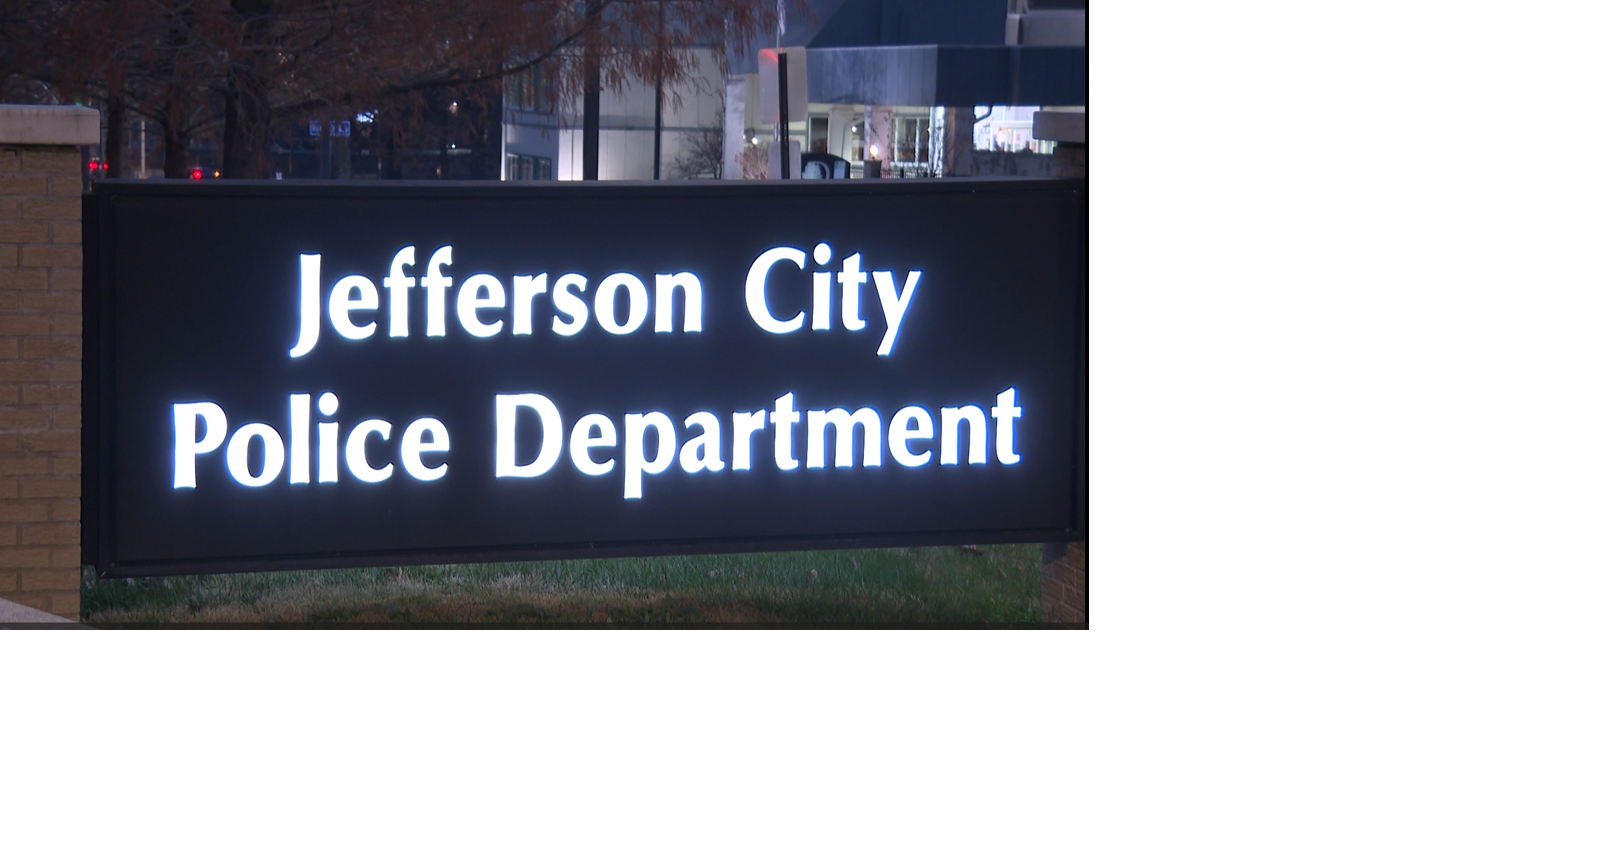 JCPD recruitment efforts backed by City Council | Mid-Missouri News ...